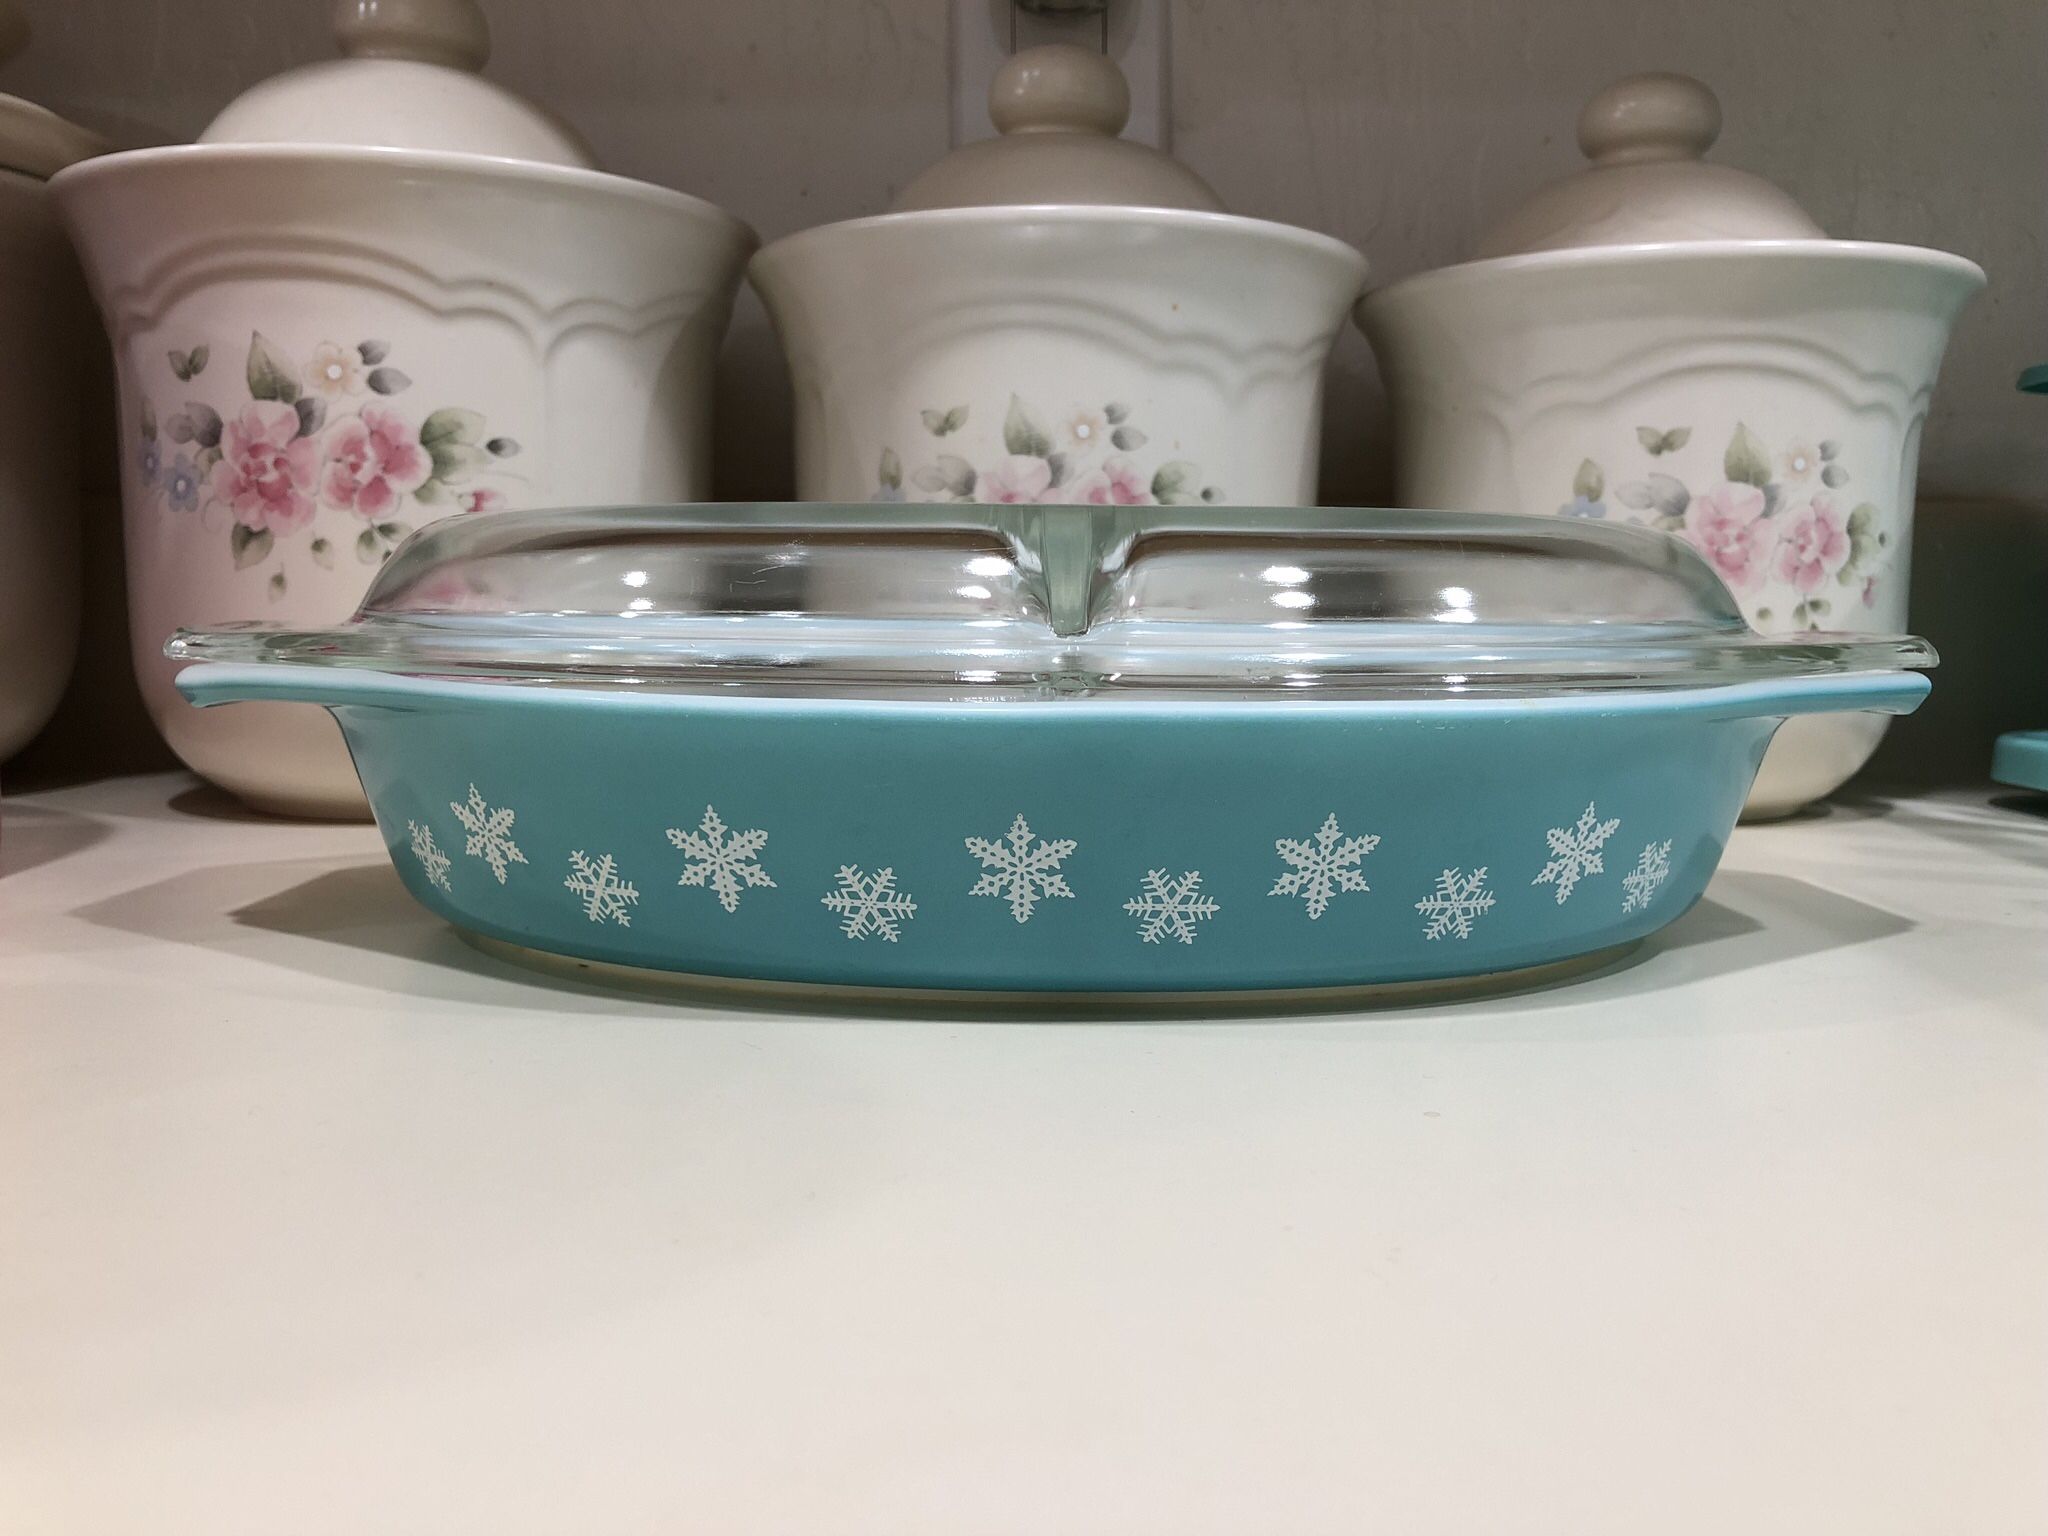 Vintage Pyrex Turquoise Snowflake Divided Casserole Dish